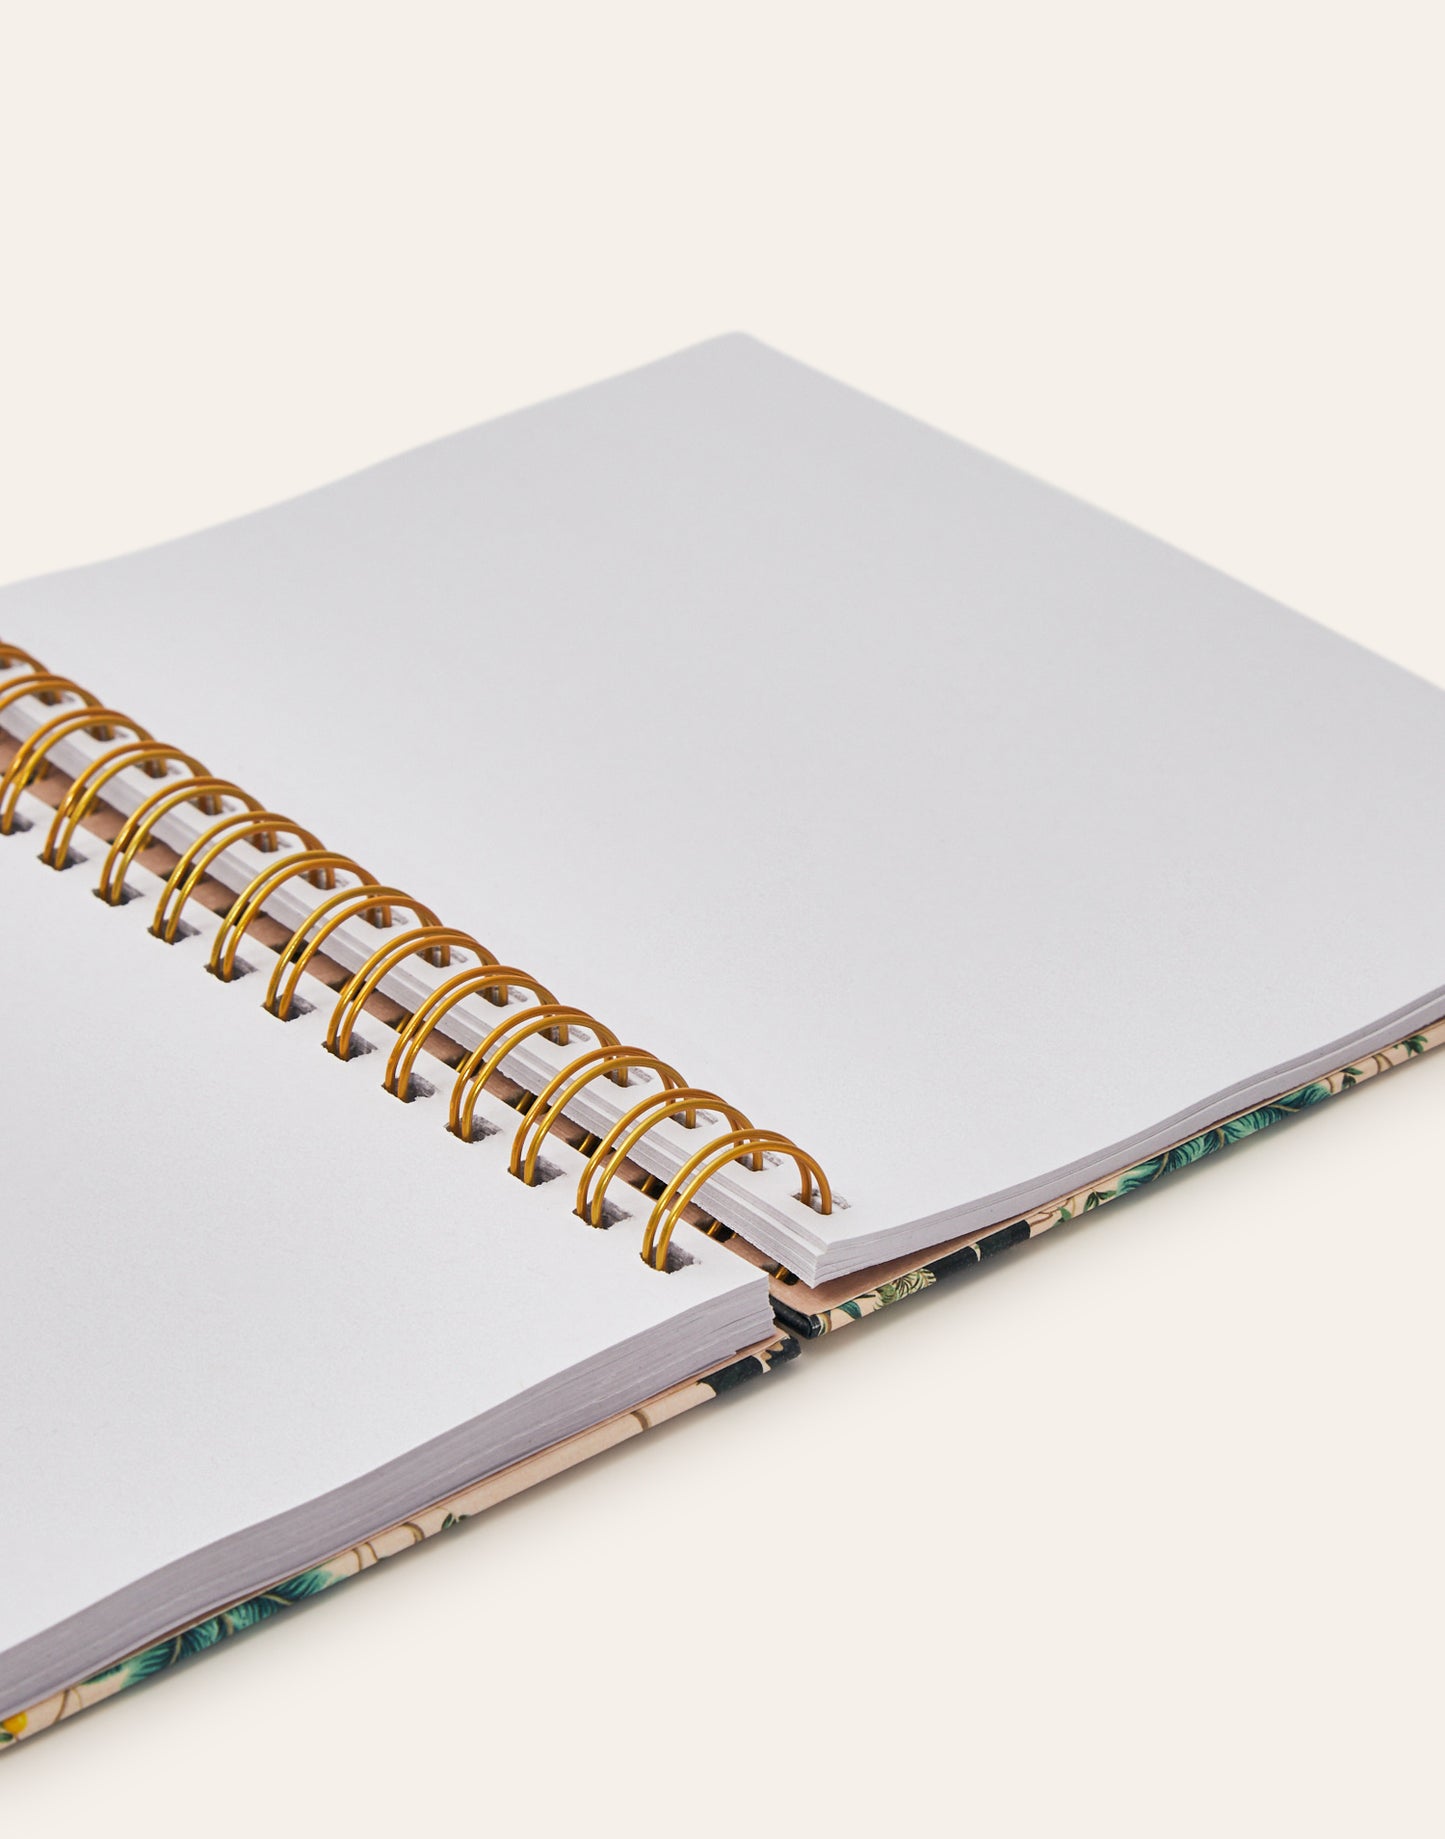 Spiral-bound covered notebook Elephant